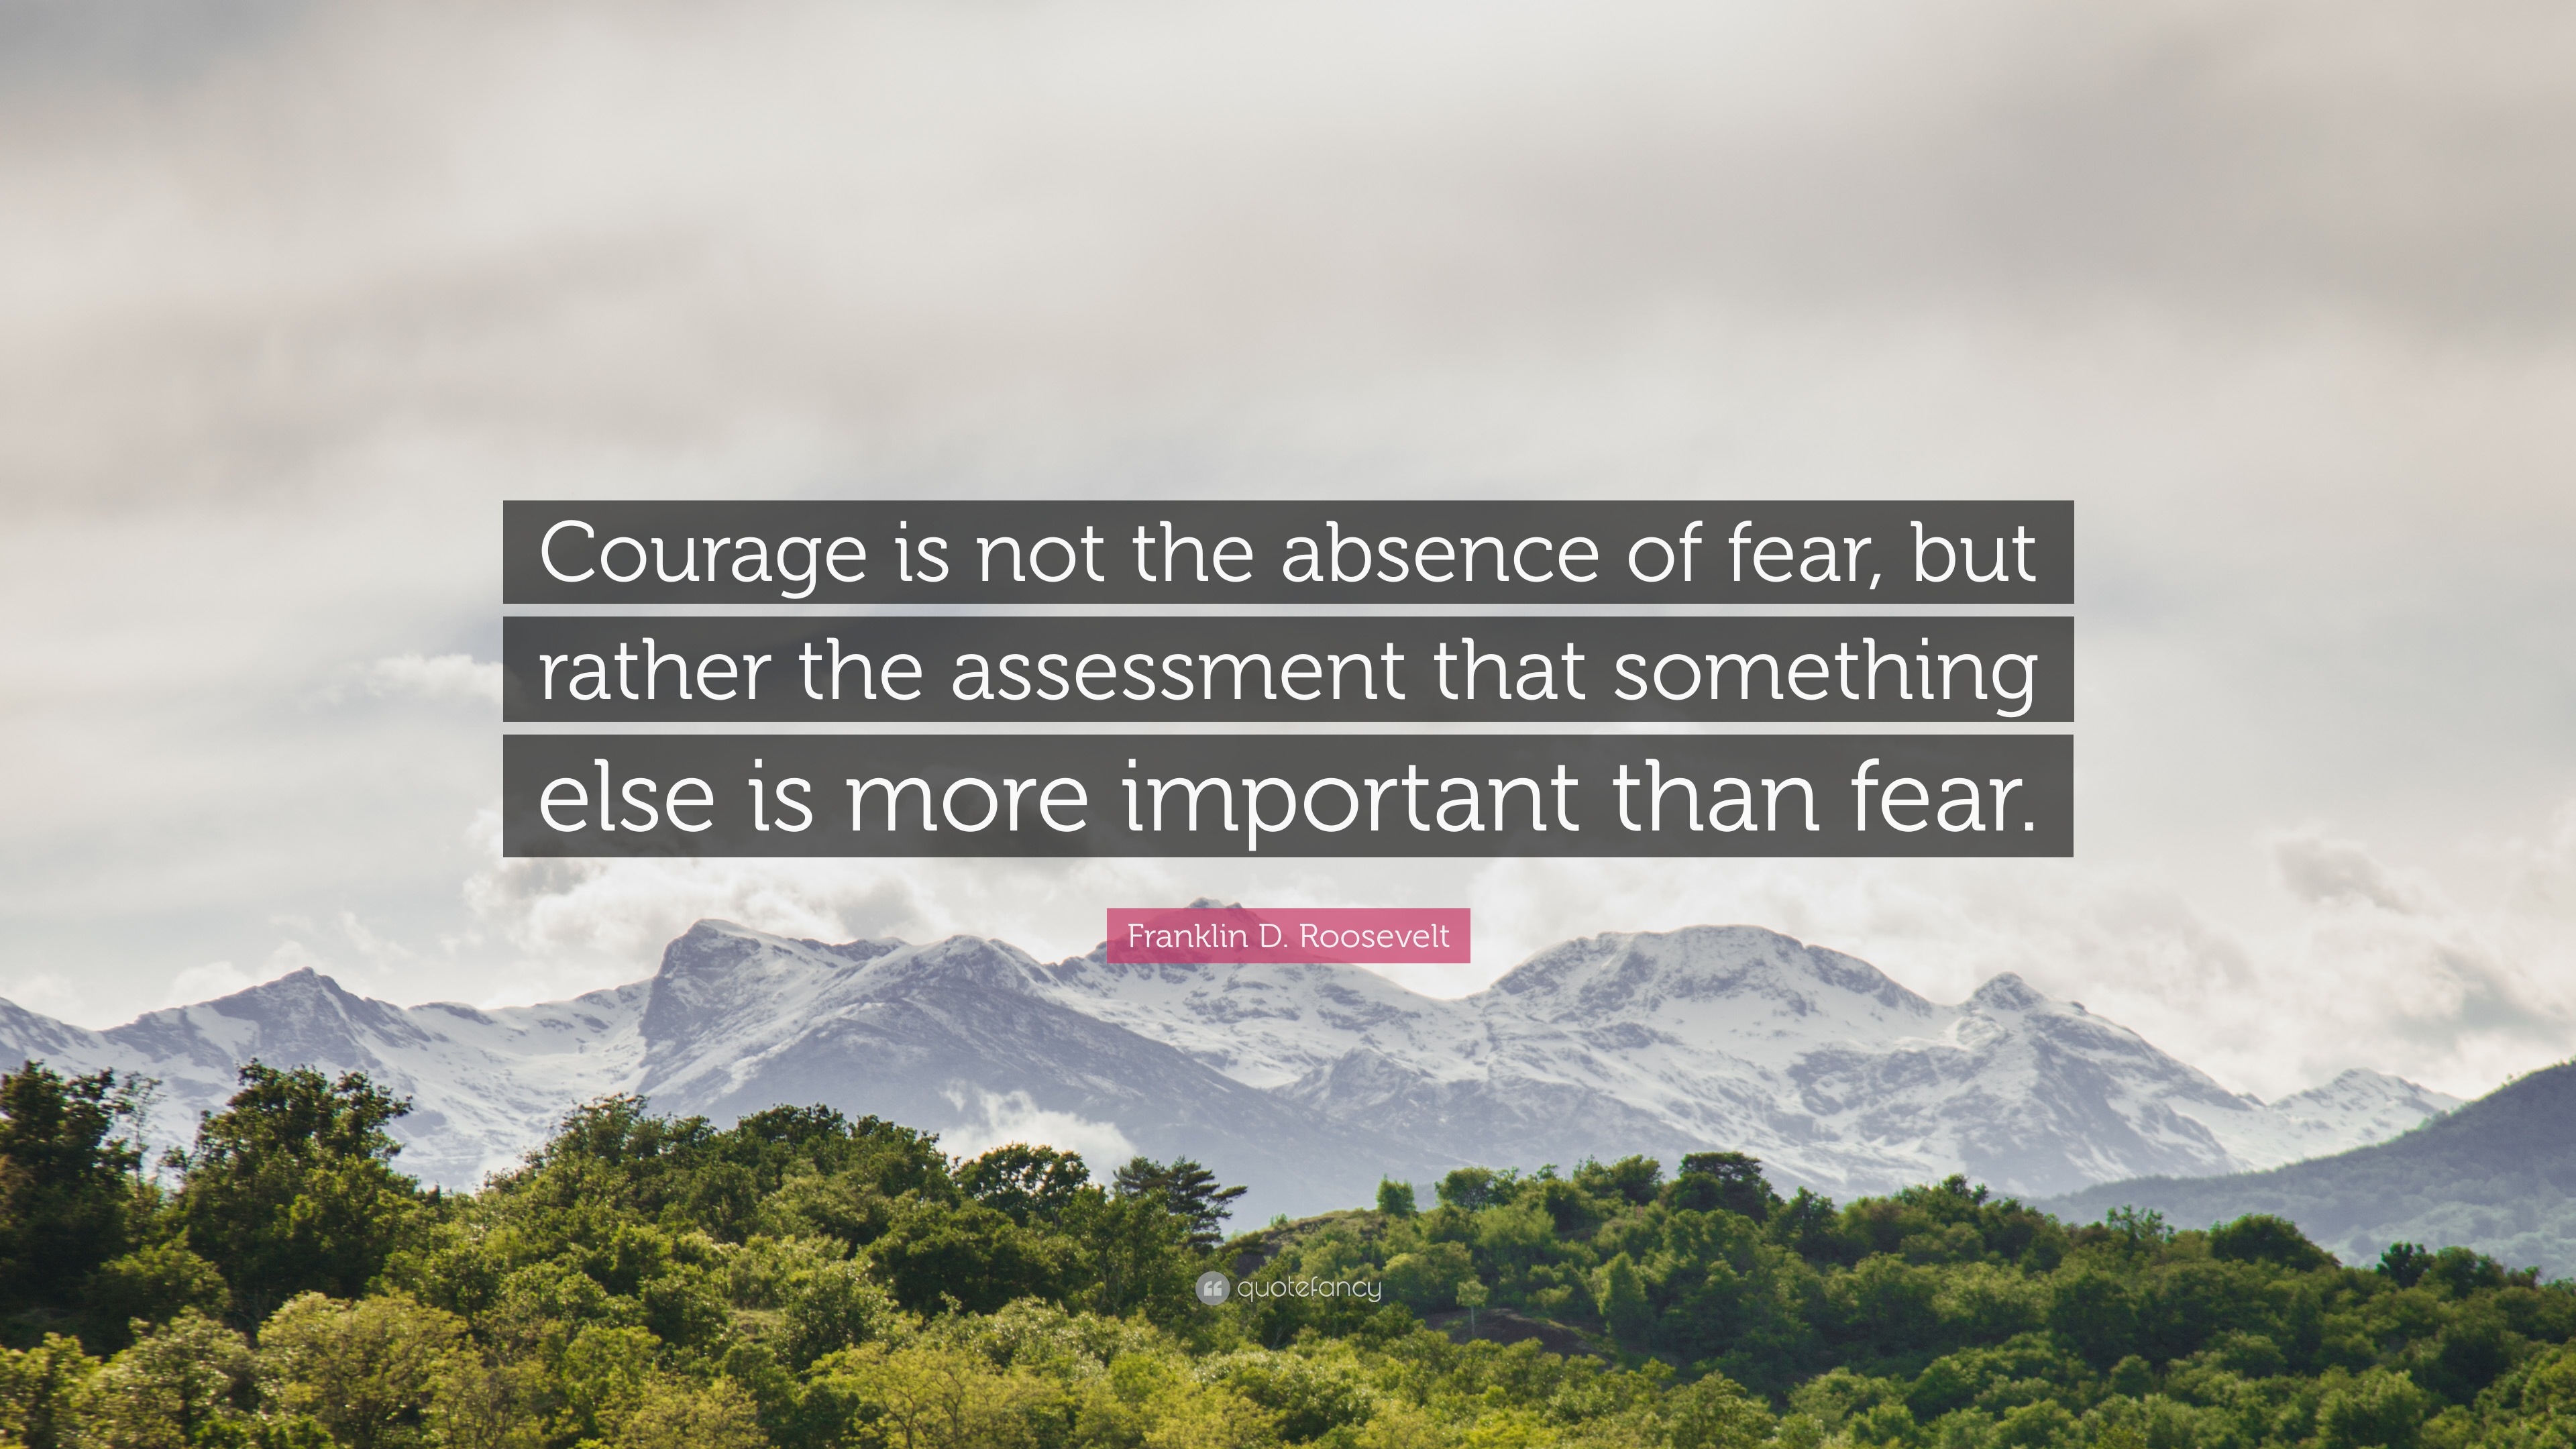 Courage Is Not The Absence of Fear - It's Meaning & Significance